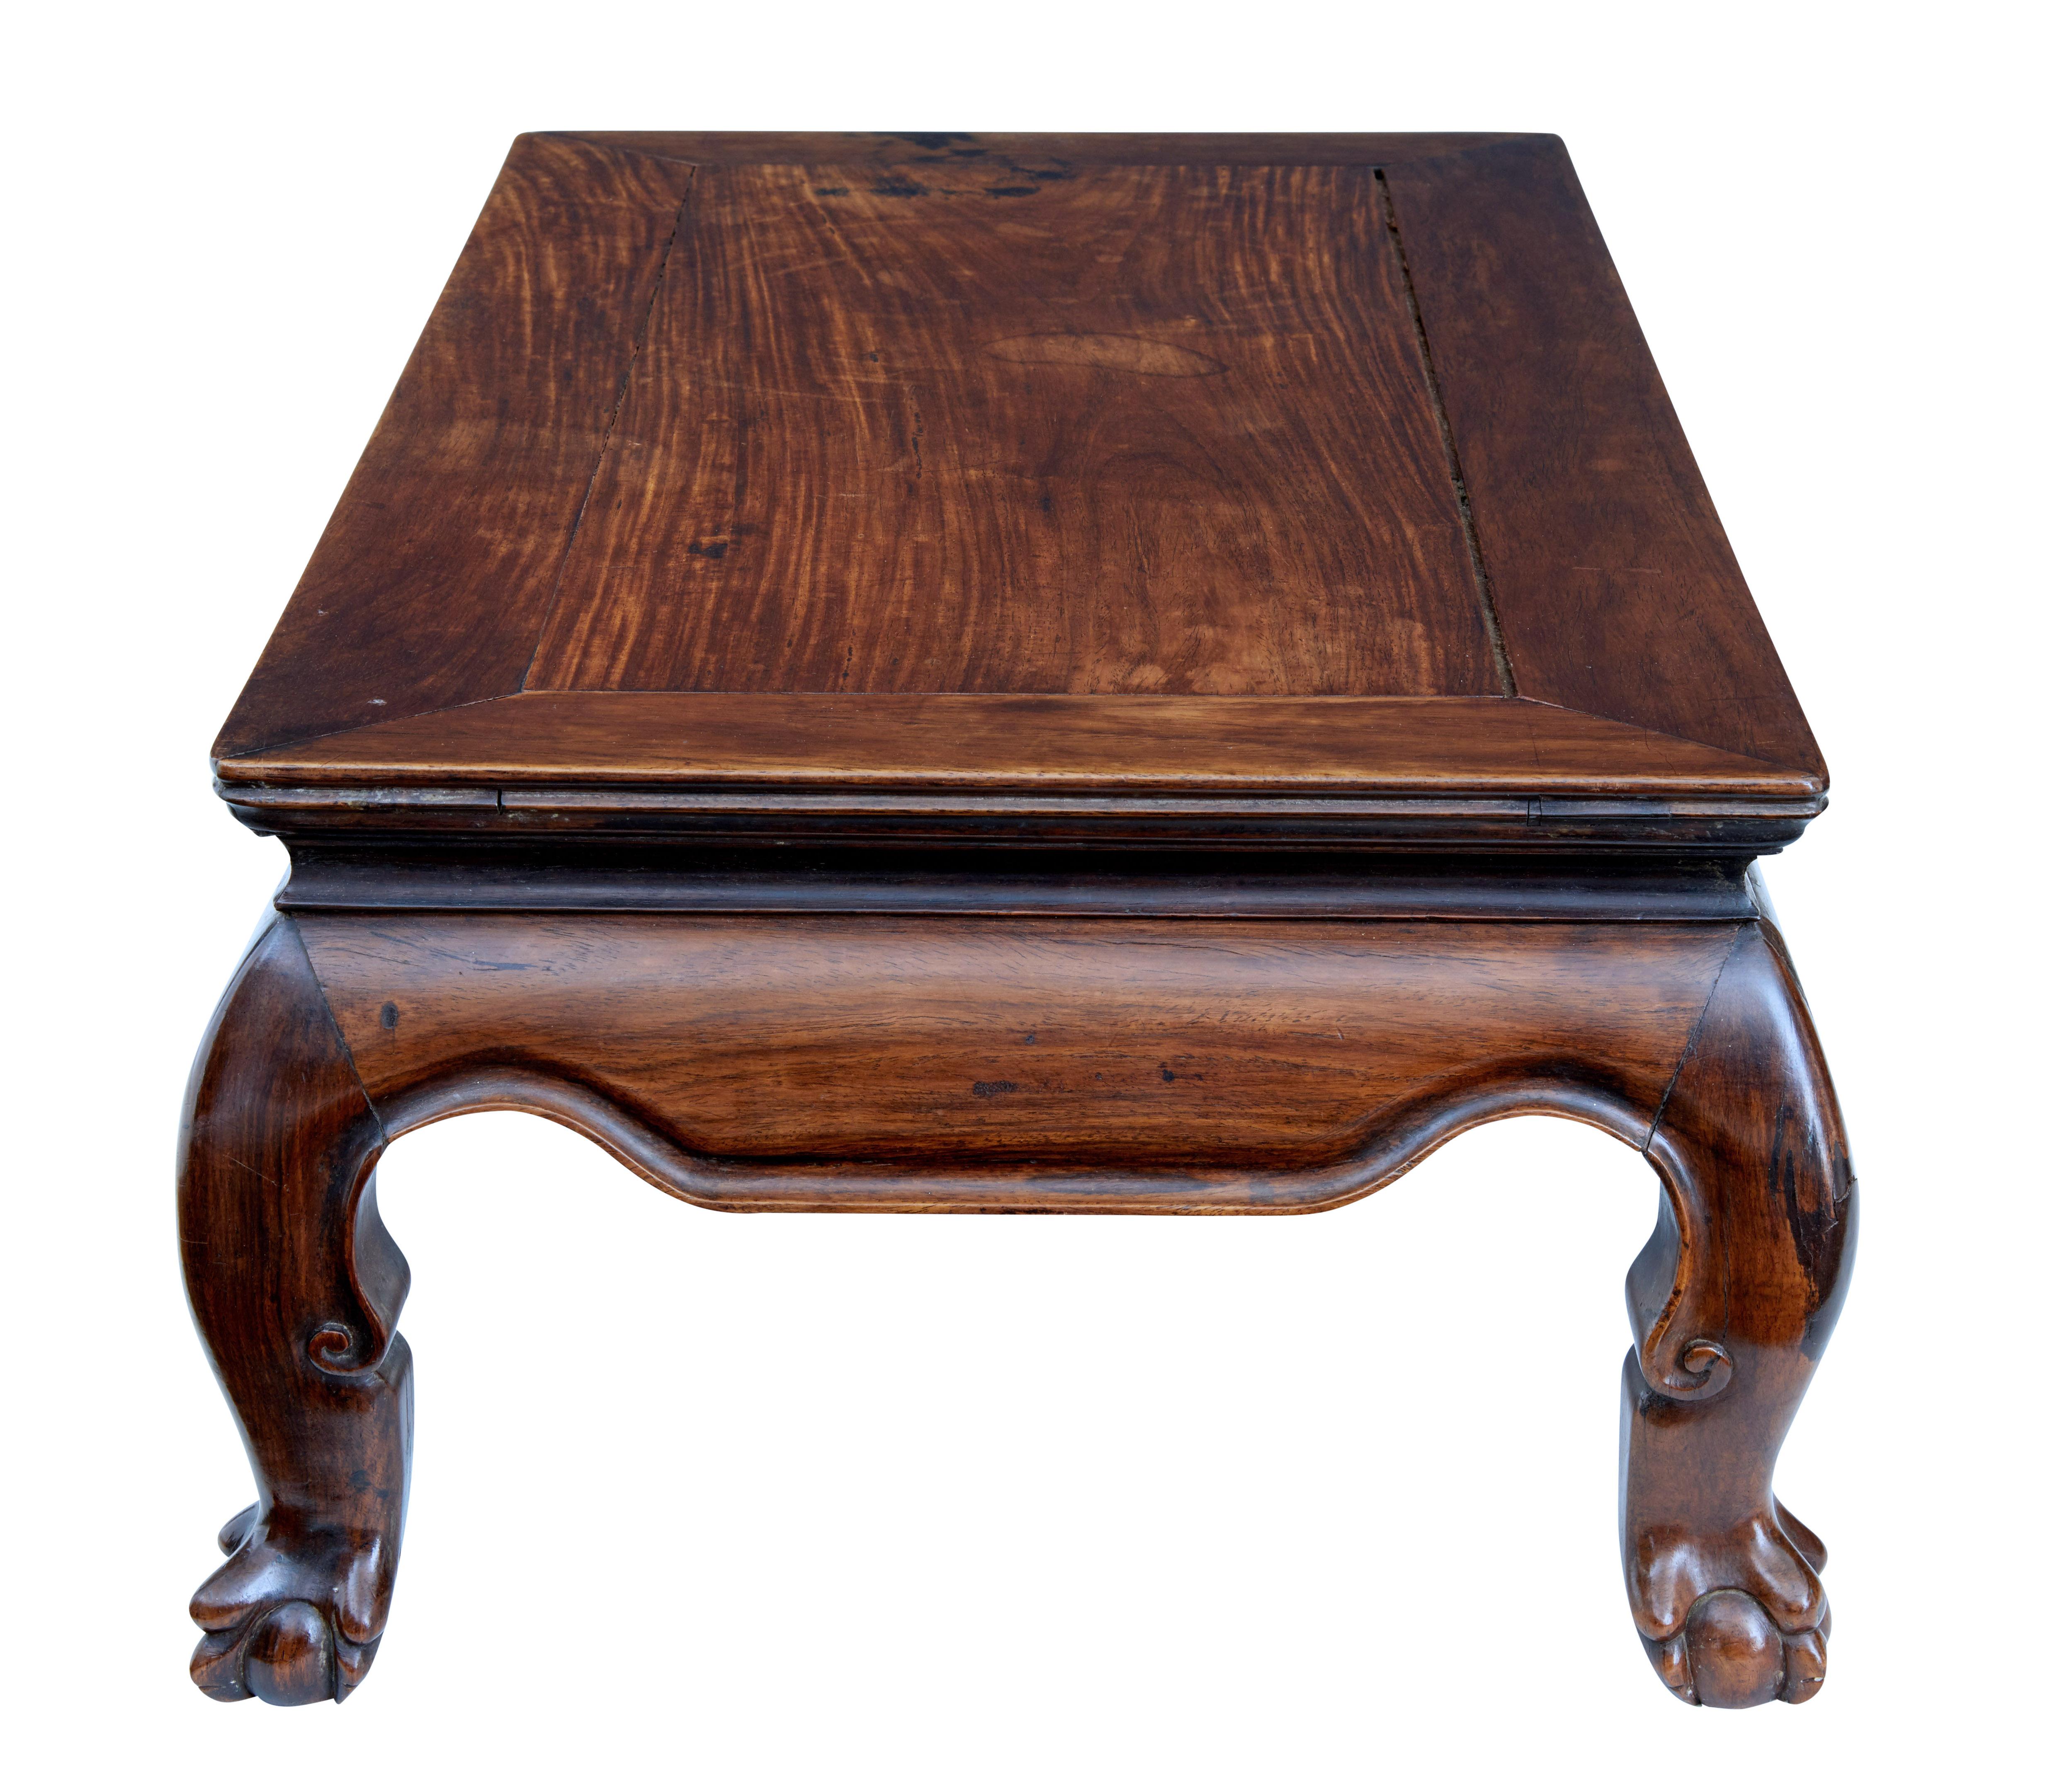 19th century small Chinese huanghuali kang table circa 1800.

Kang tables are dual purpose pieces of furniture that served as low tables, benches and larger versions as beds. Our example is made from huanghuali. Rectangular top with typical shaped